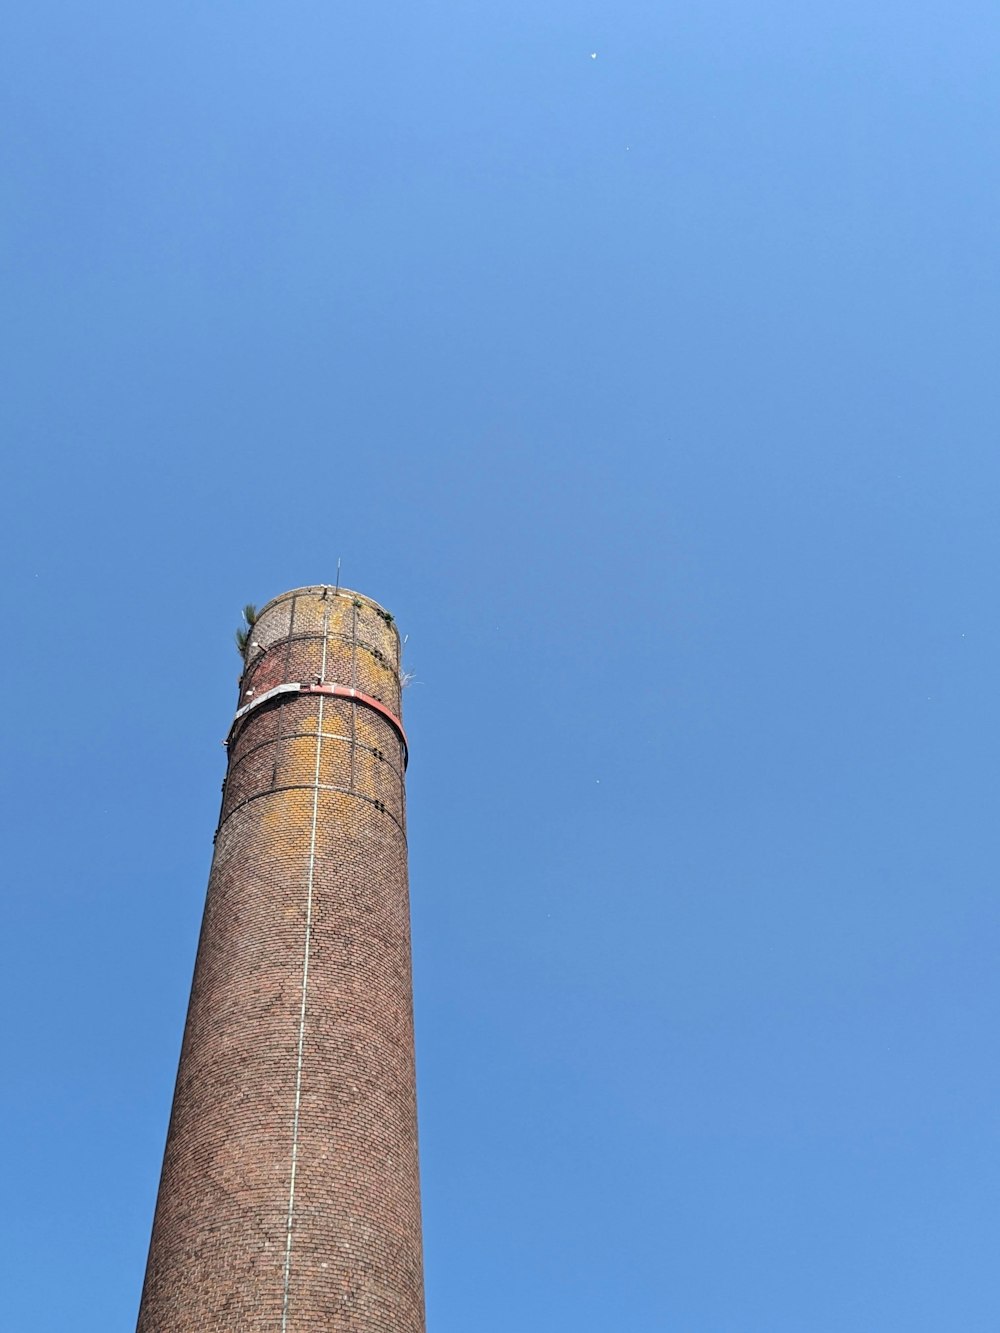 a tall brick tower with a blue sky in the background